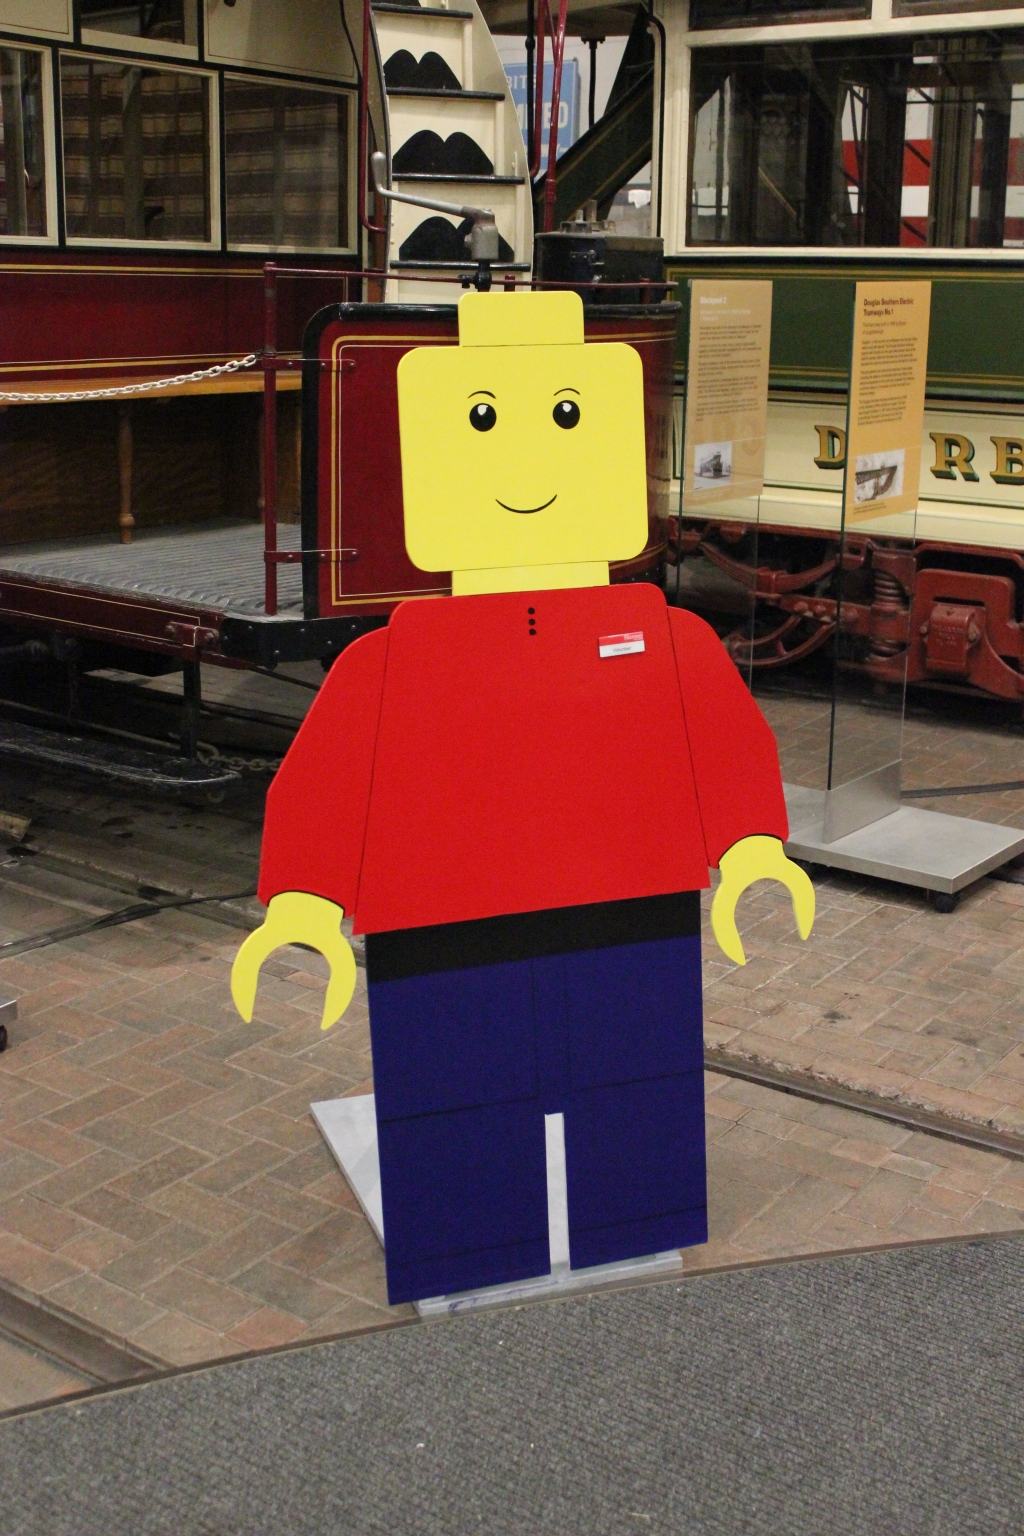 A cut out figure for visitors to have their photos taken with in the Great Exhibition Hall at Crich Tramway Village in Derbyshire during their Build in Bricks event at the end of August 2018